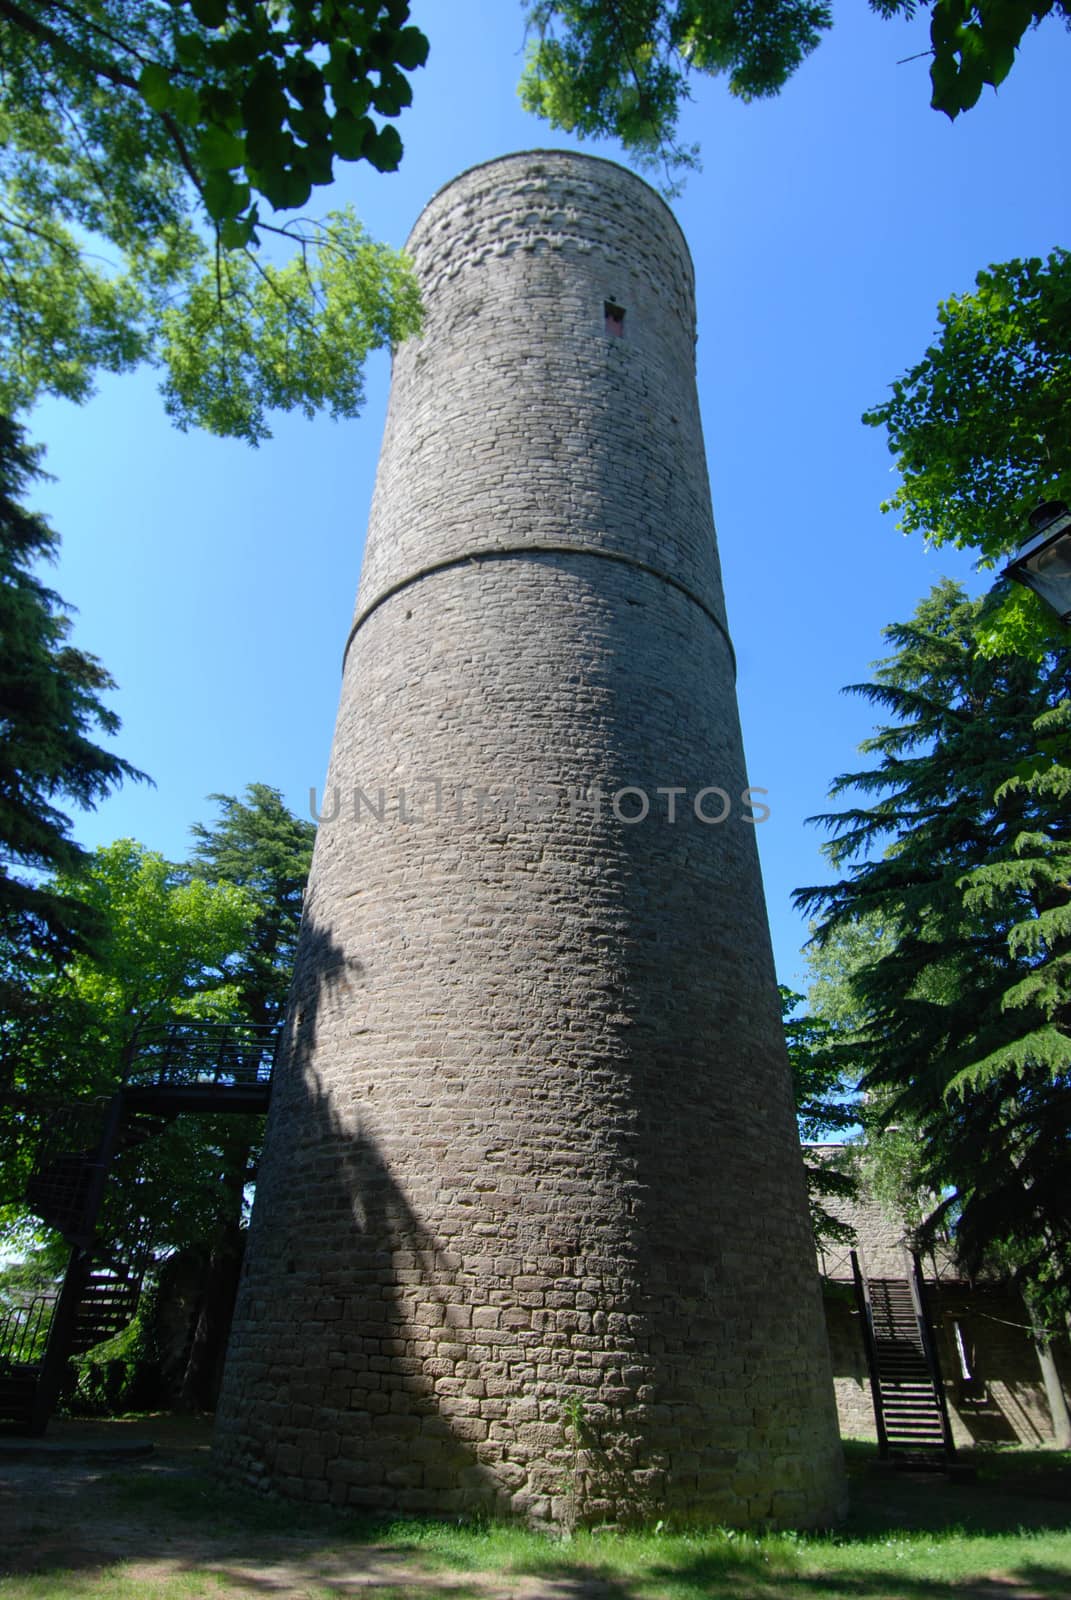 View of the Tower of Roccaverano, Cuneo Piedmont - Italy